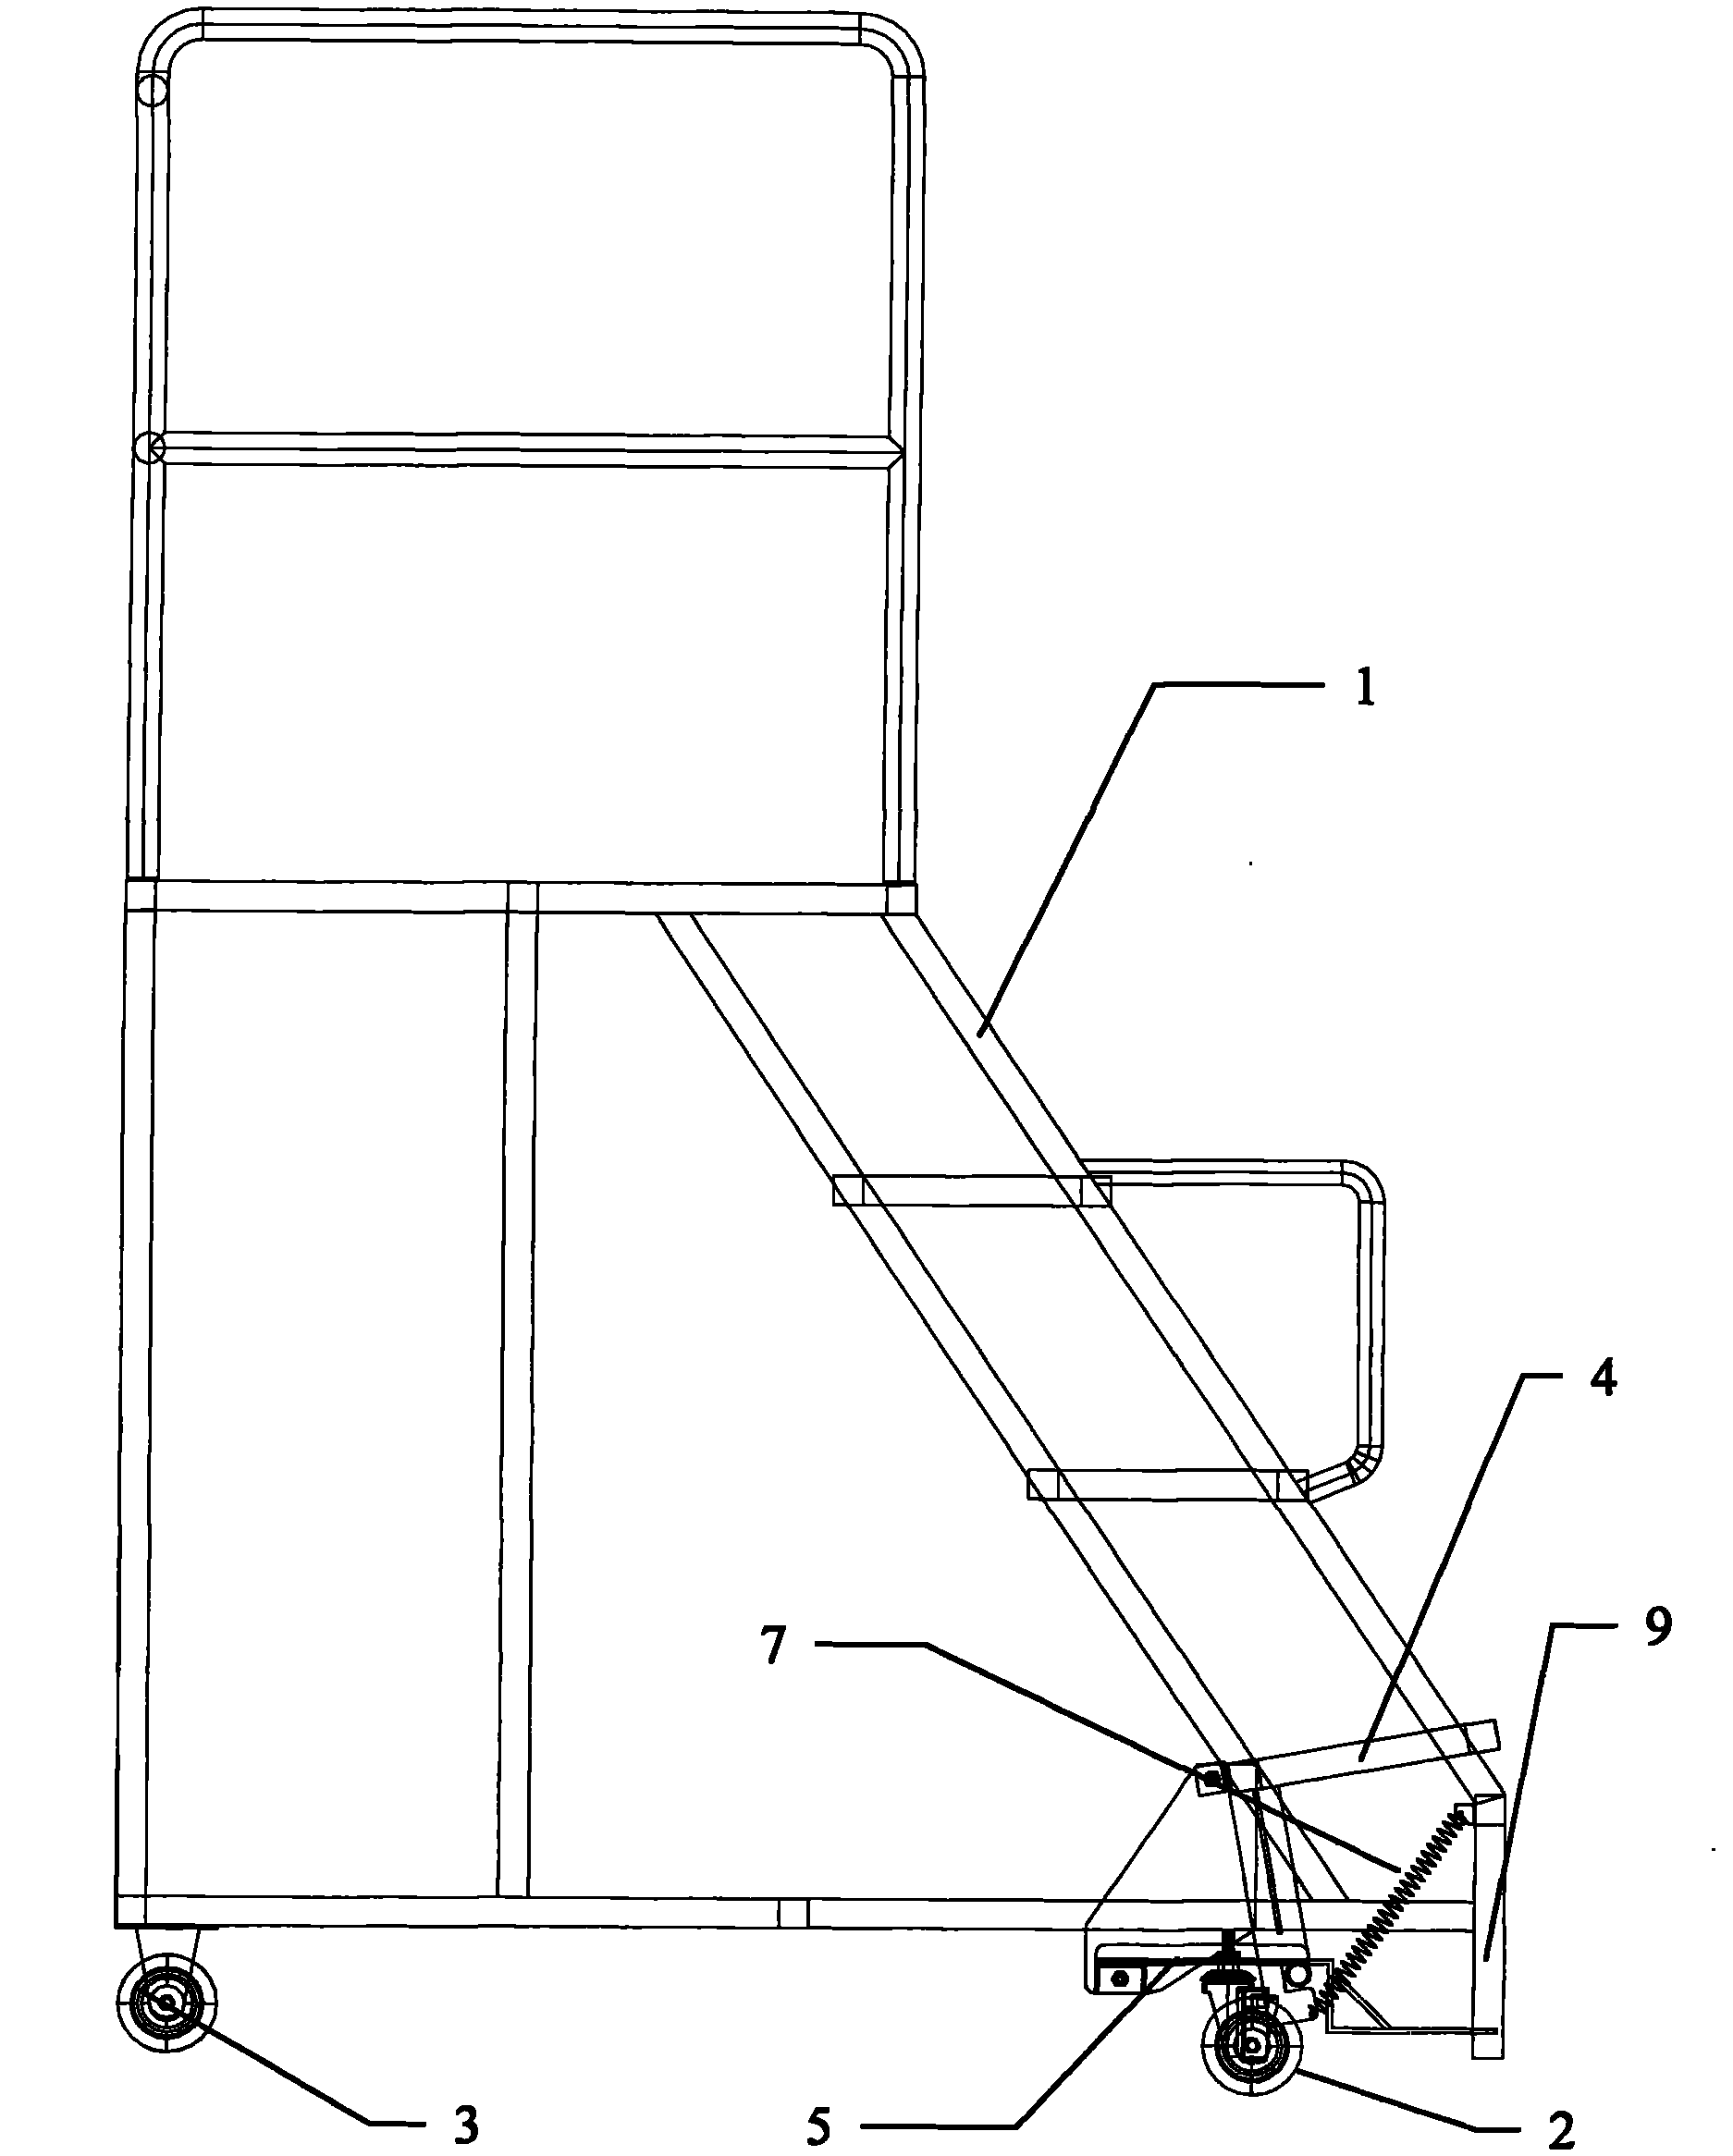 Positioning device for moveable step ladder